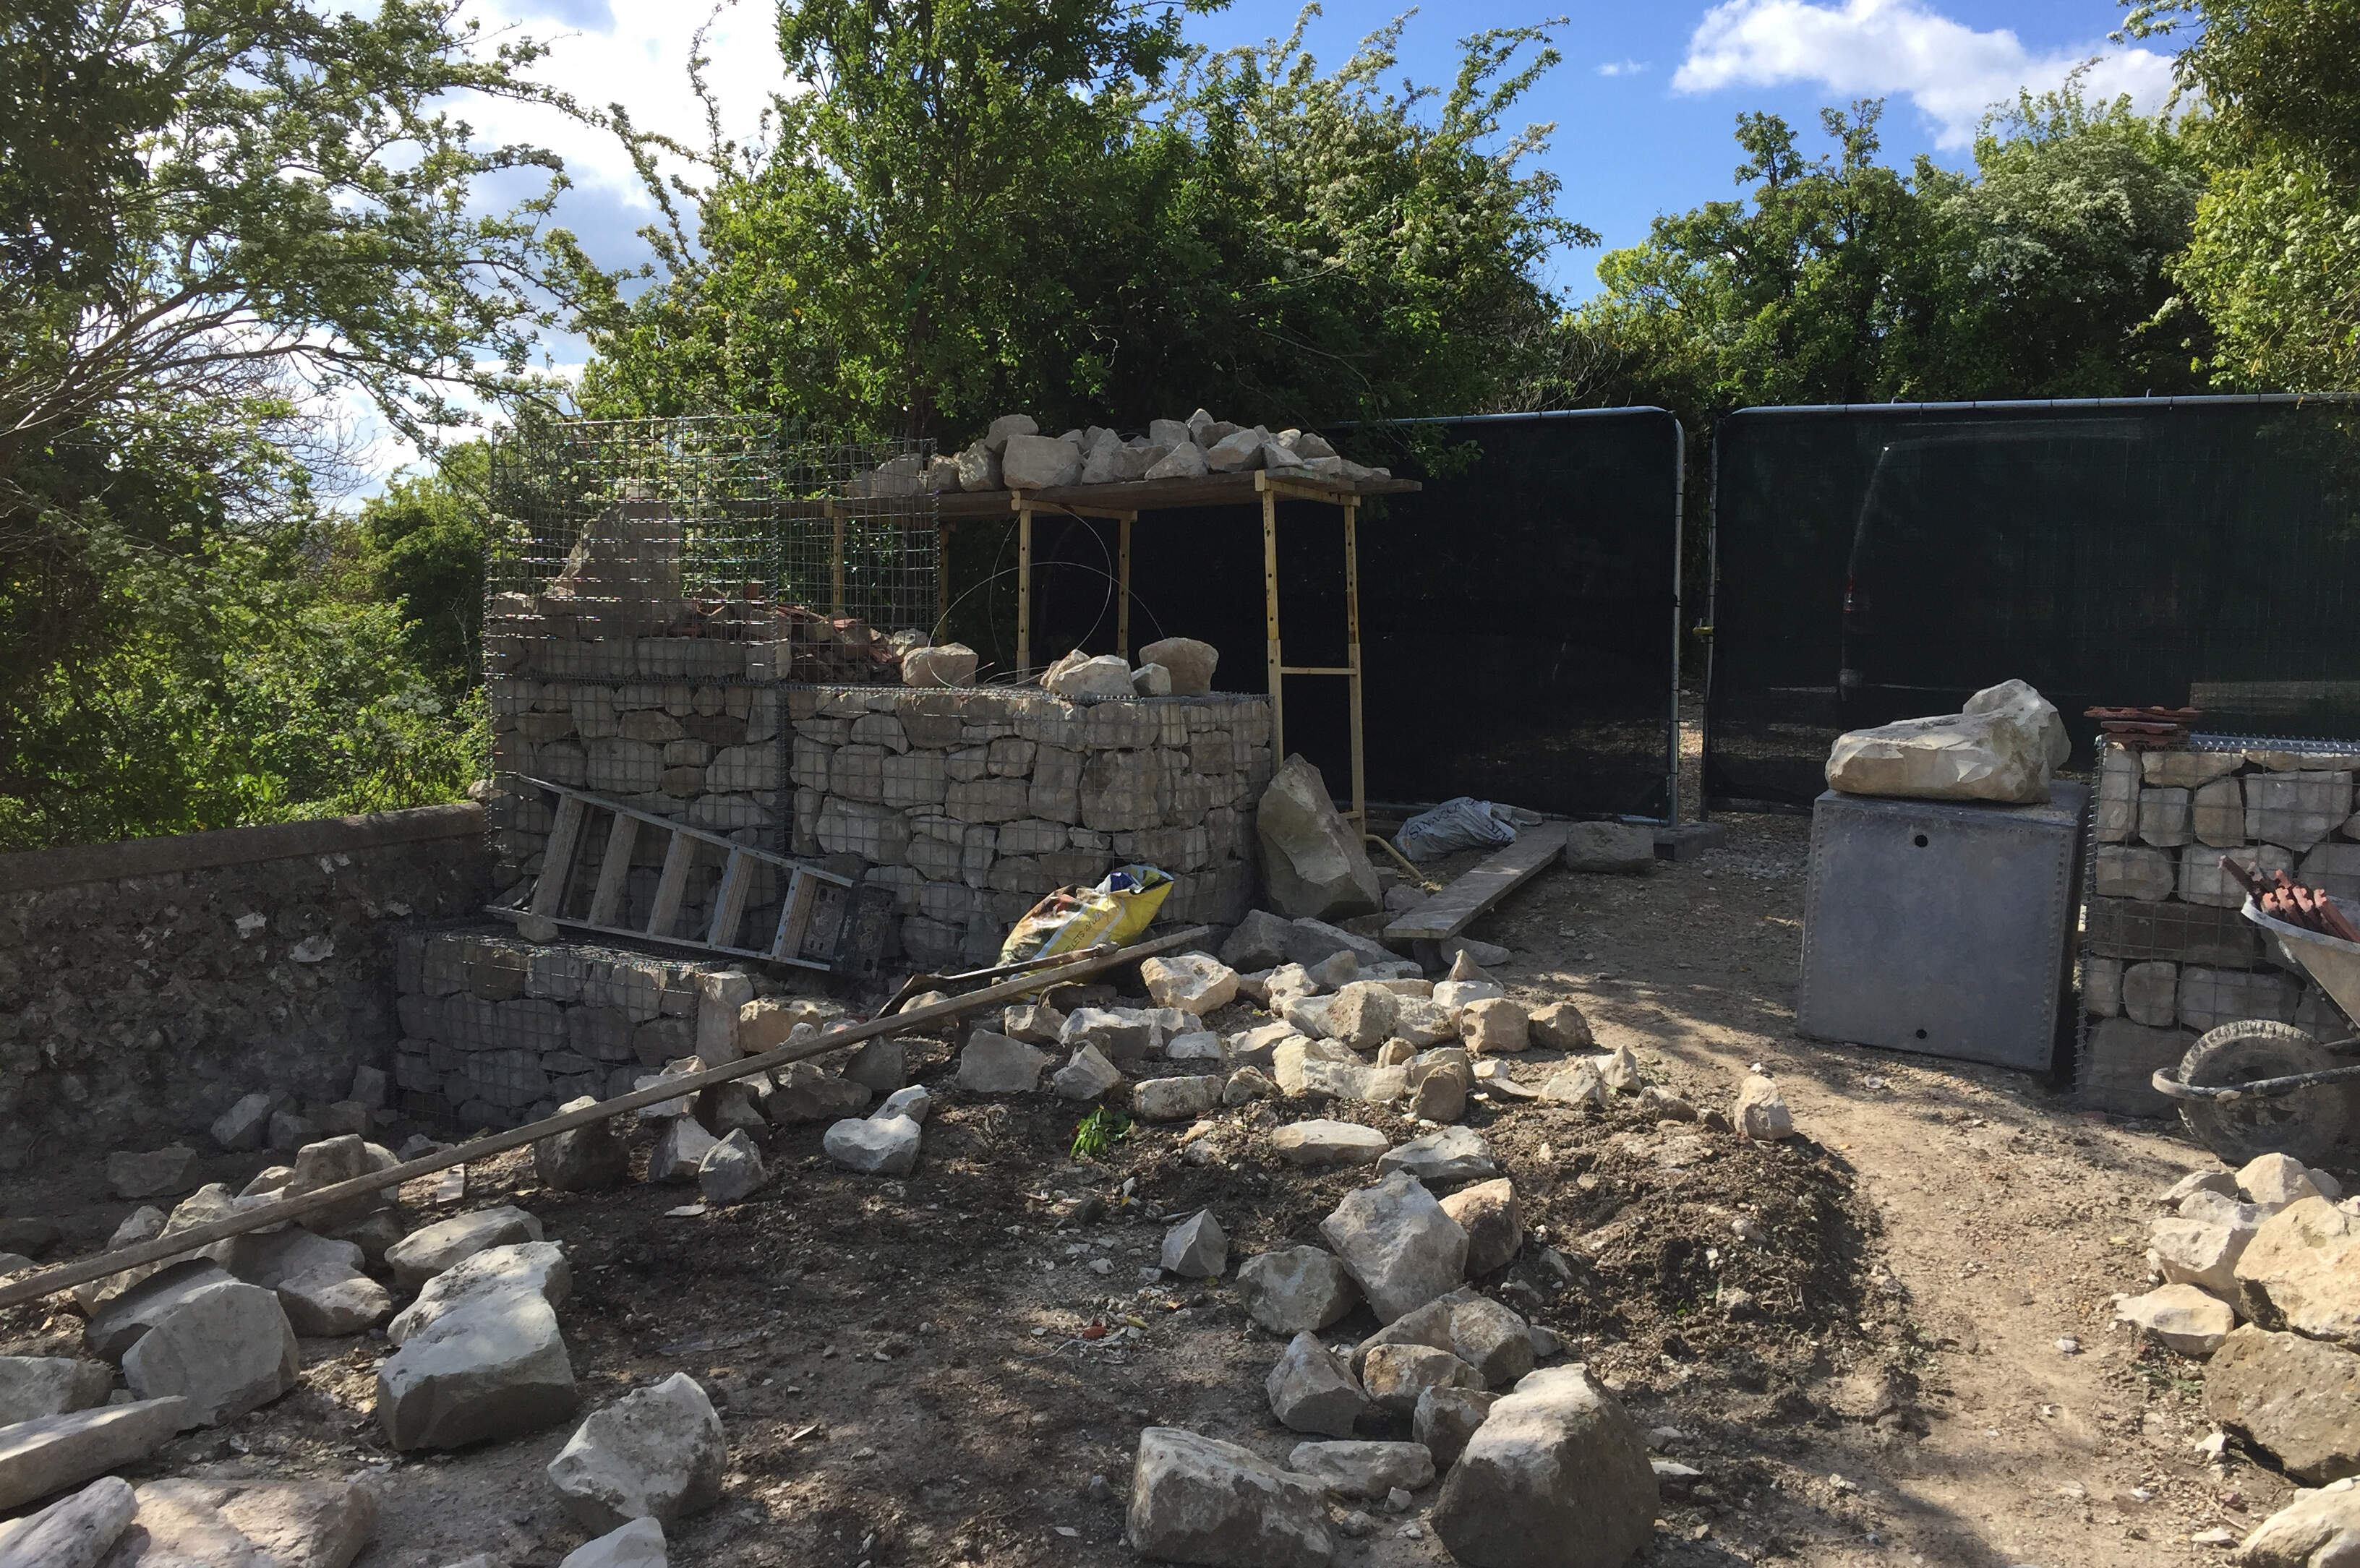 Reclained stone from the old barn was used in the construction of the gabions.